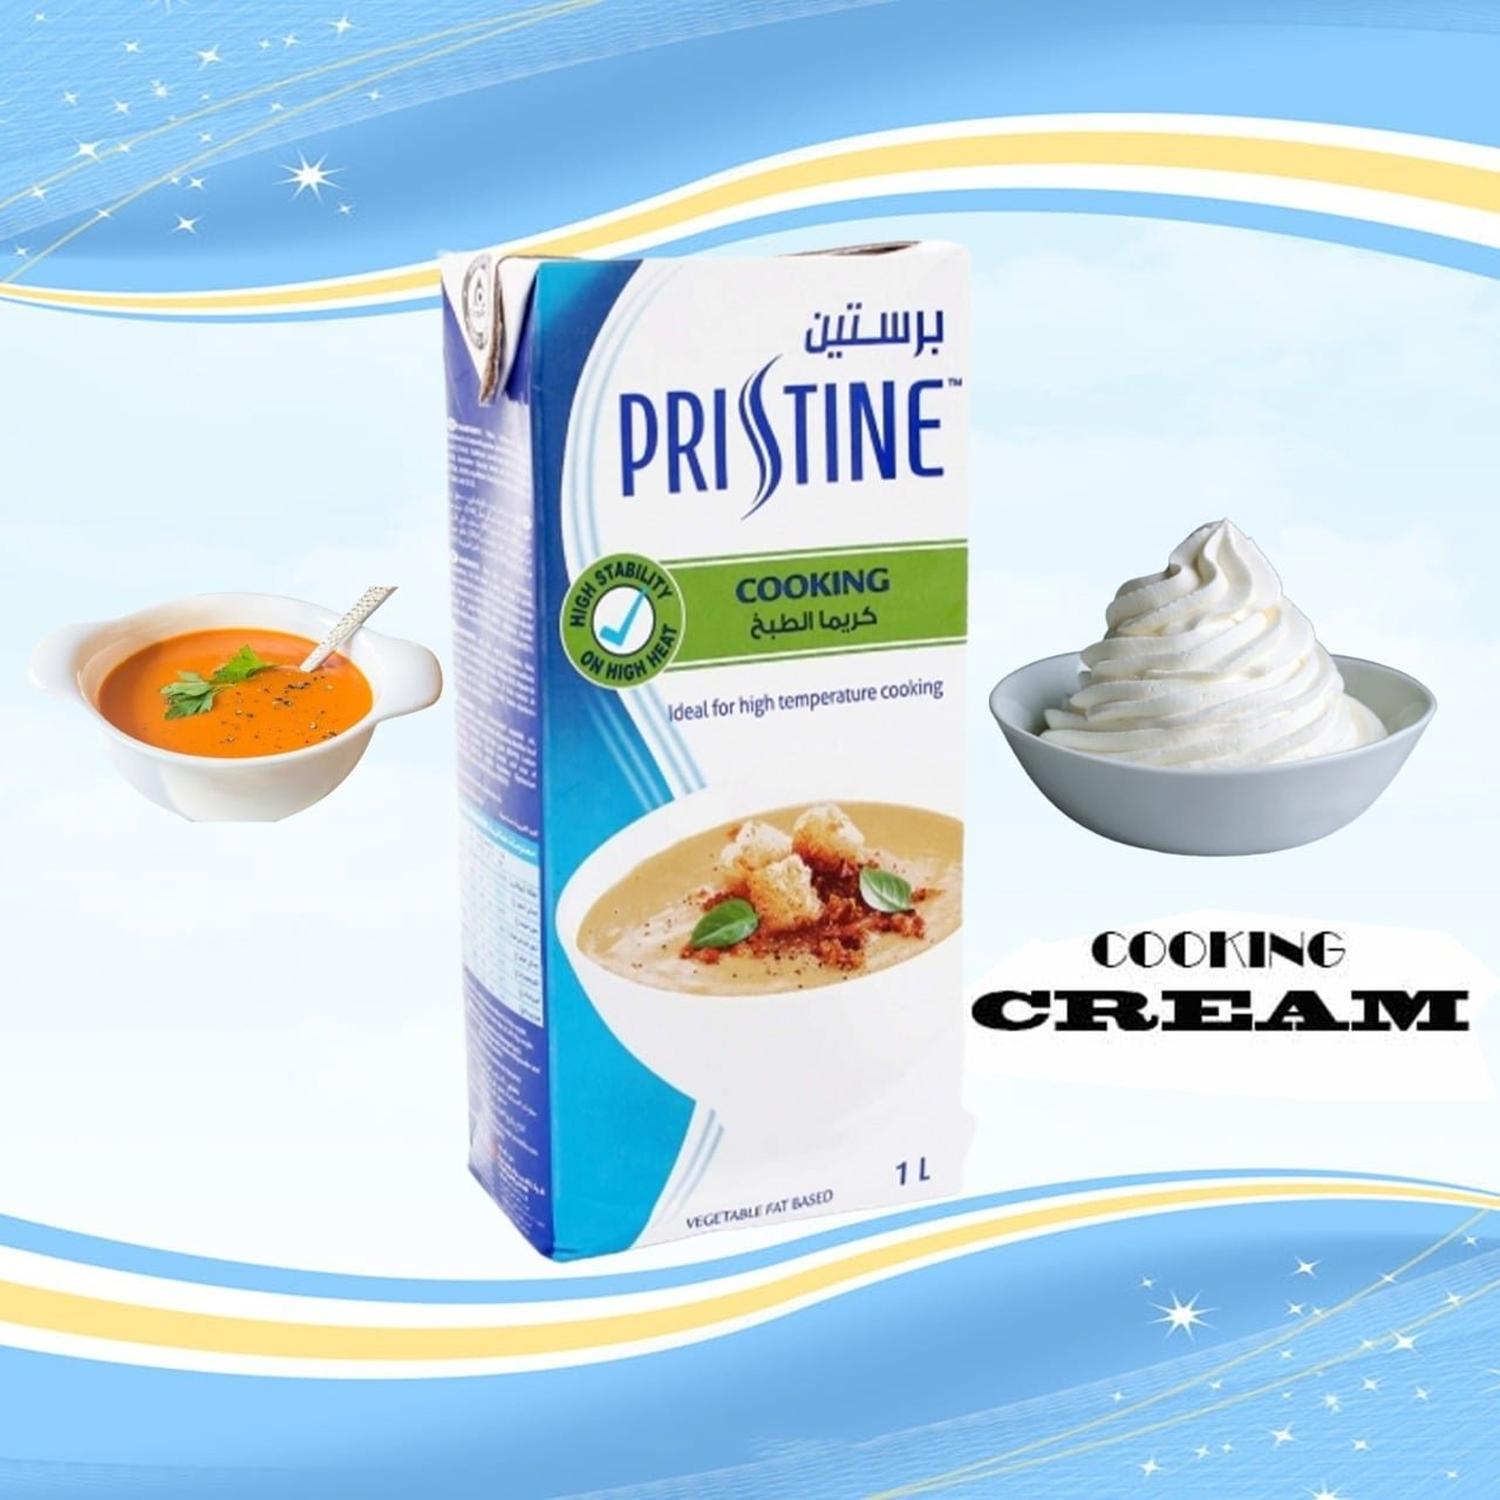 PACK OF 12 - PRISTINE COOKING CREAM 1LITRE